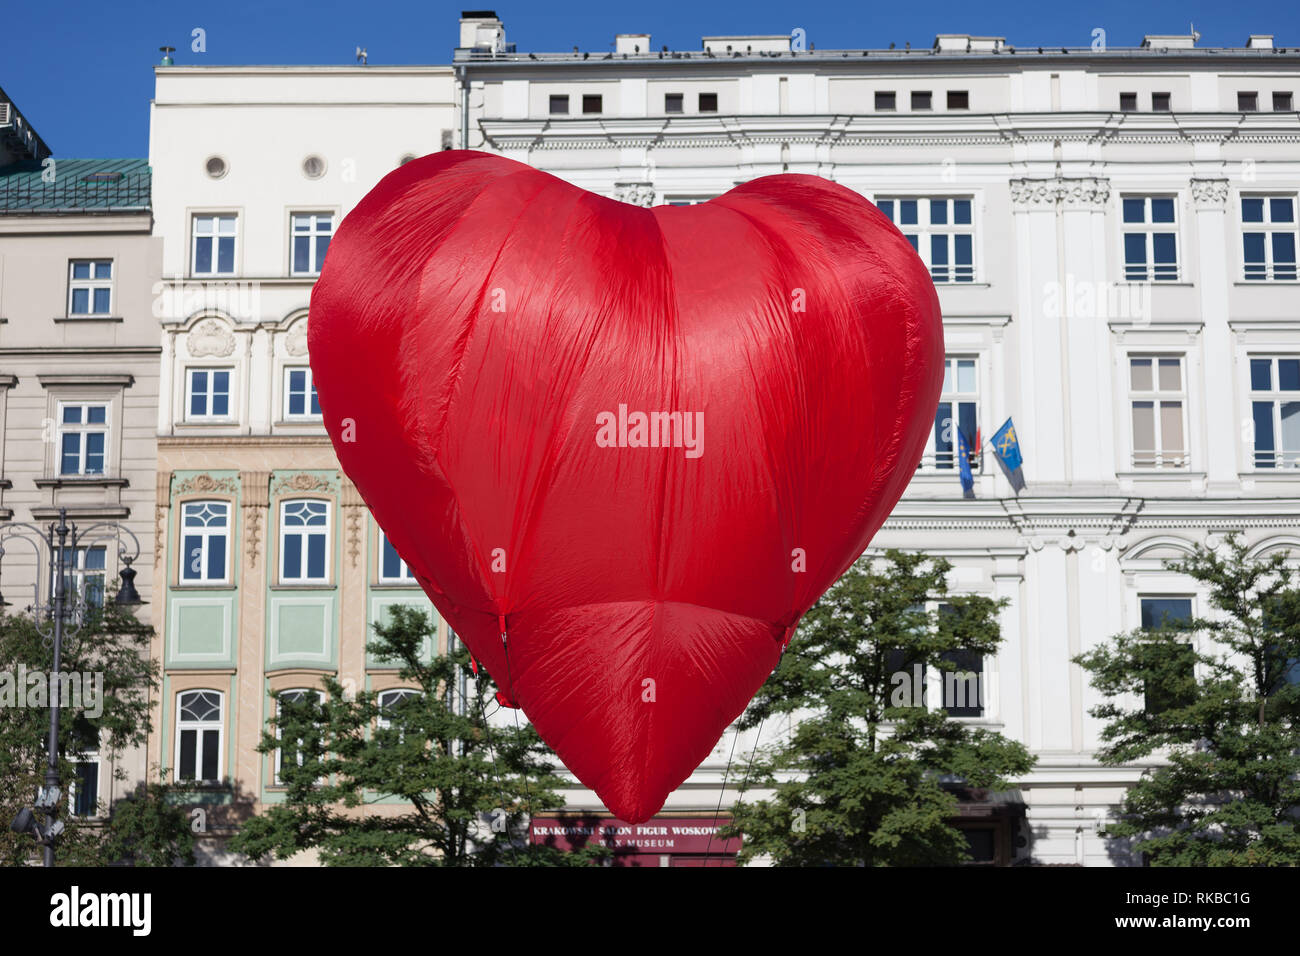 Heart shaped big red balloon in the city Stock Photo